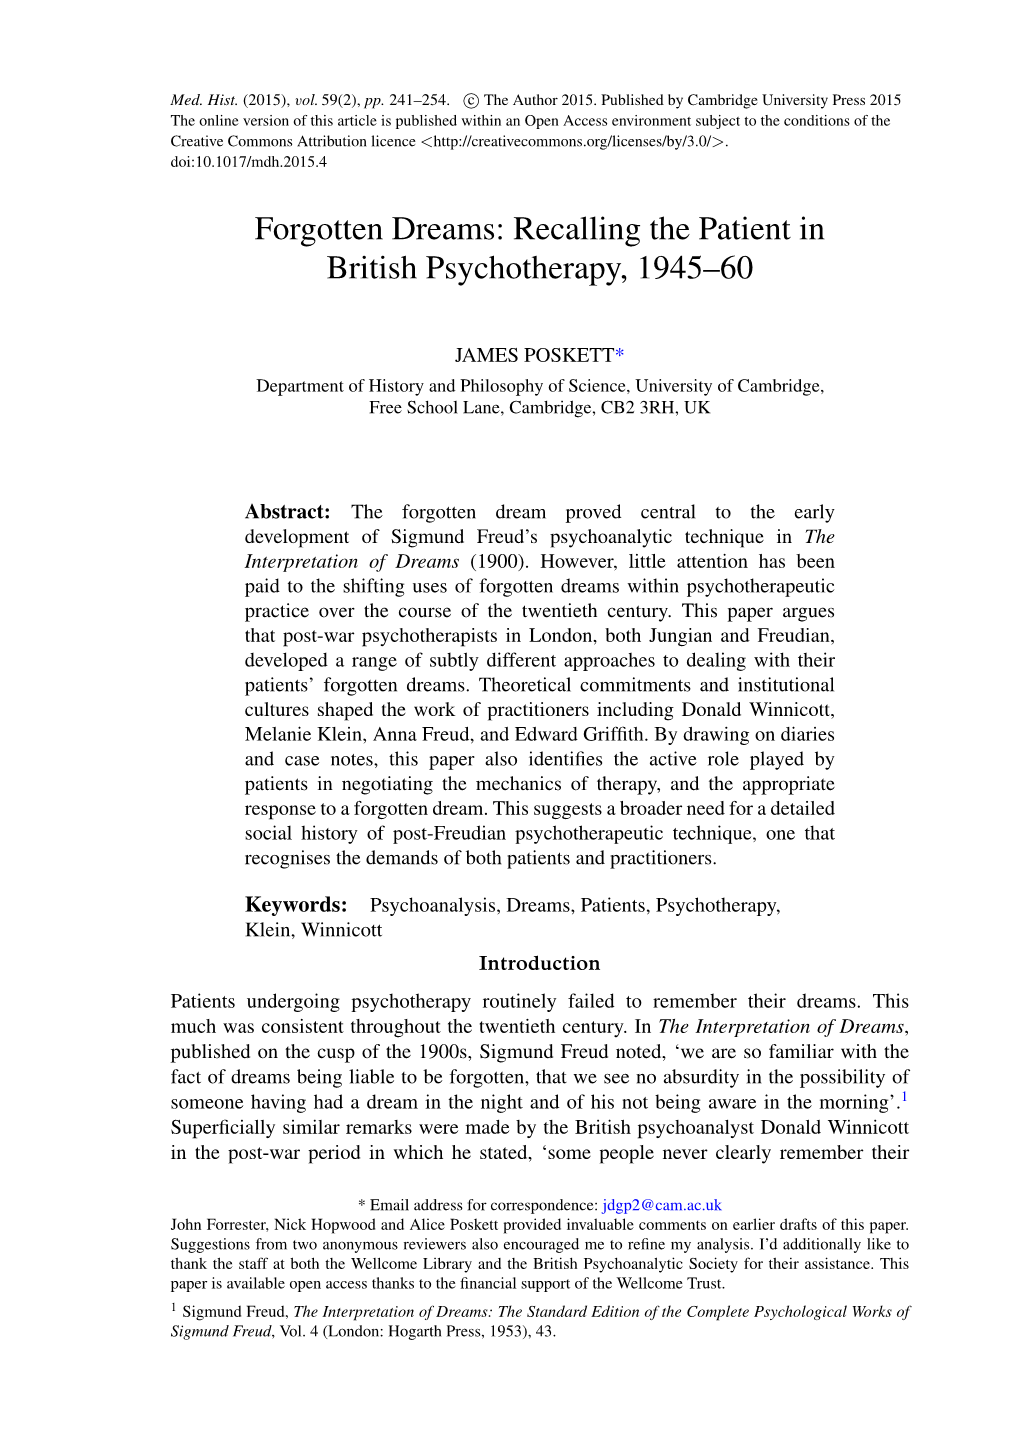 Forgotten Dreams: Recalling the Patient in British Psychotherapy, 1945–60